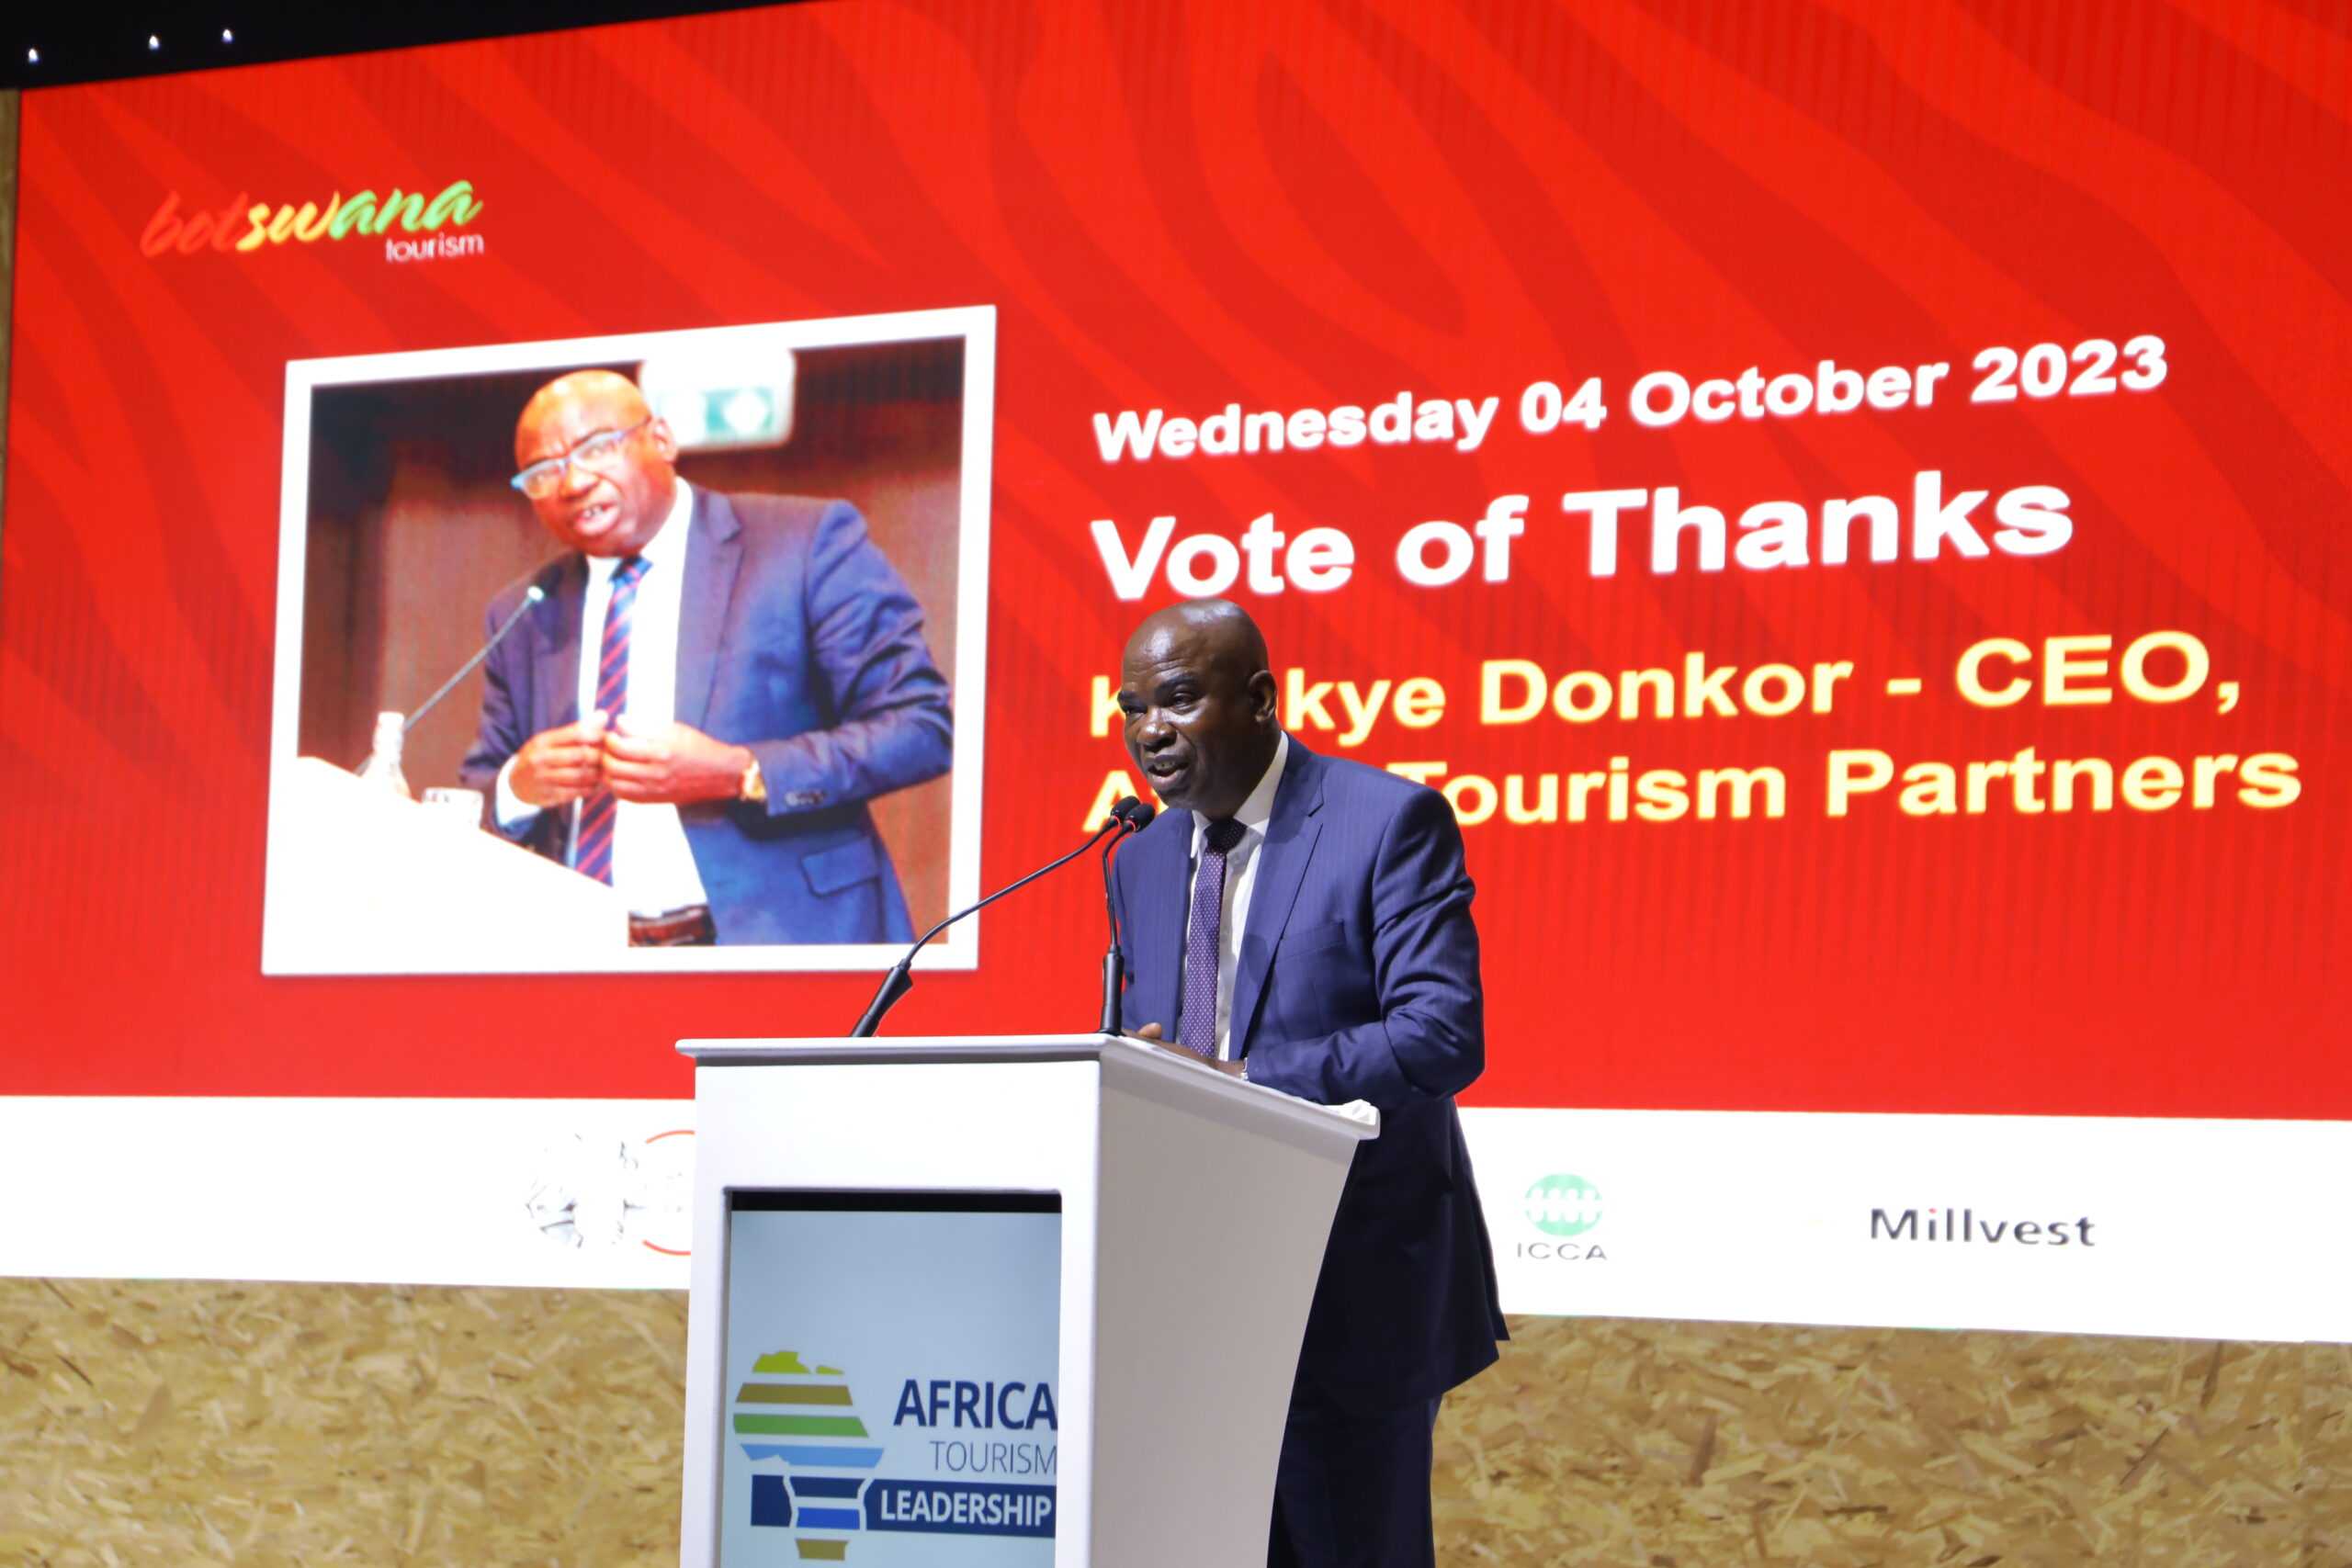 6th-africa-tourism-leadership-forum-opens_53233452756_o